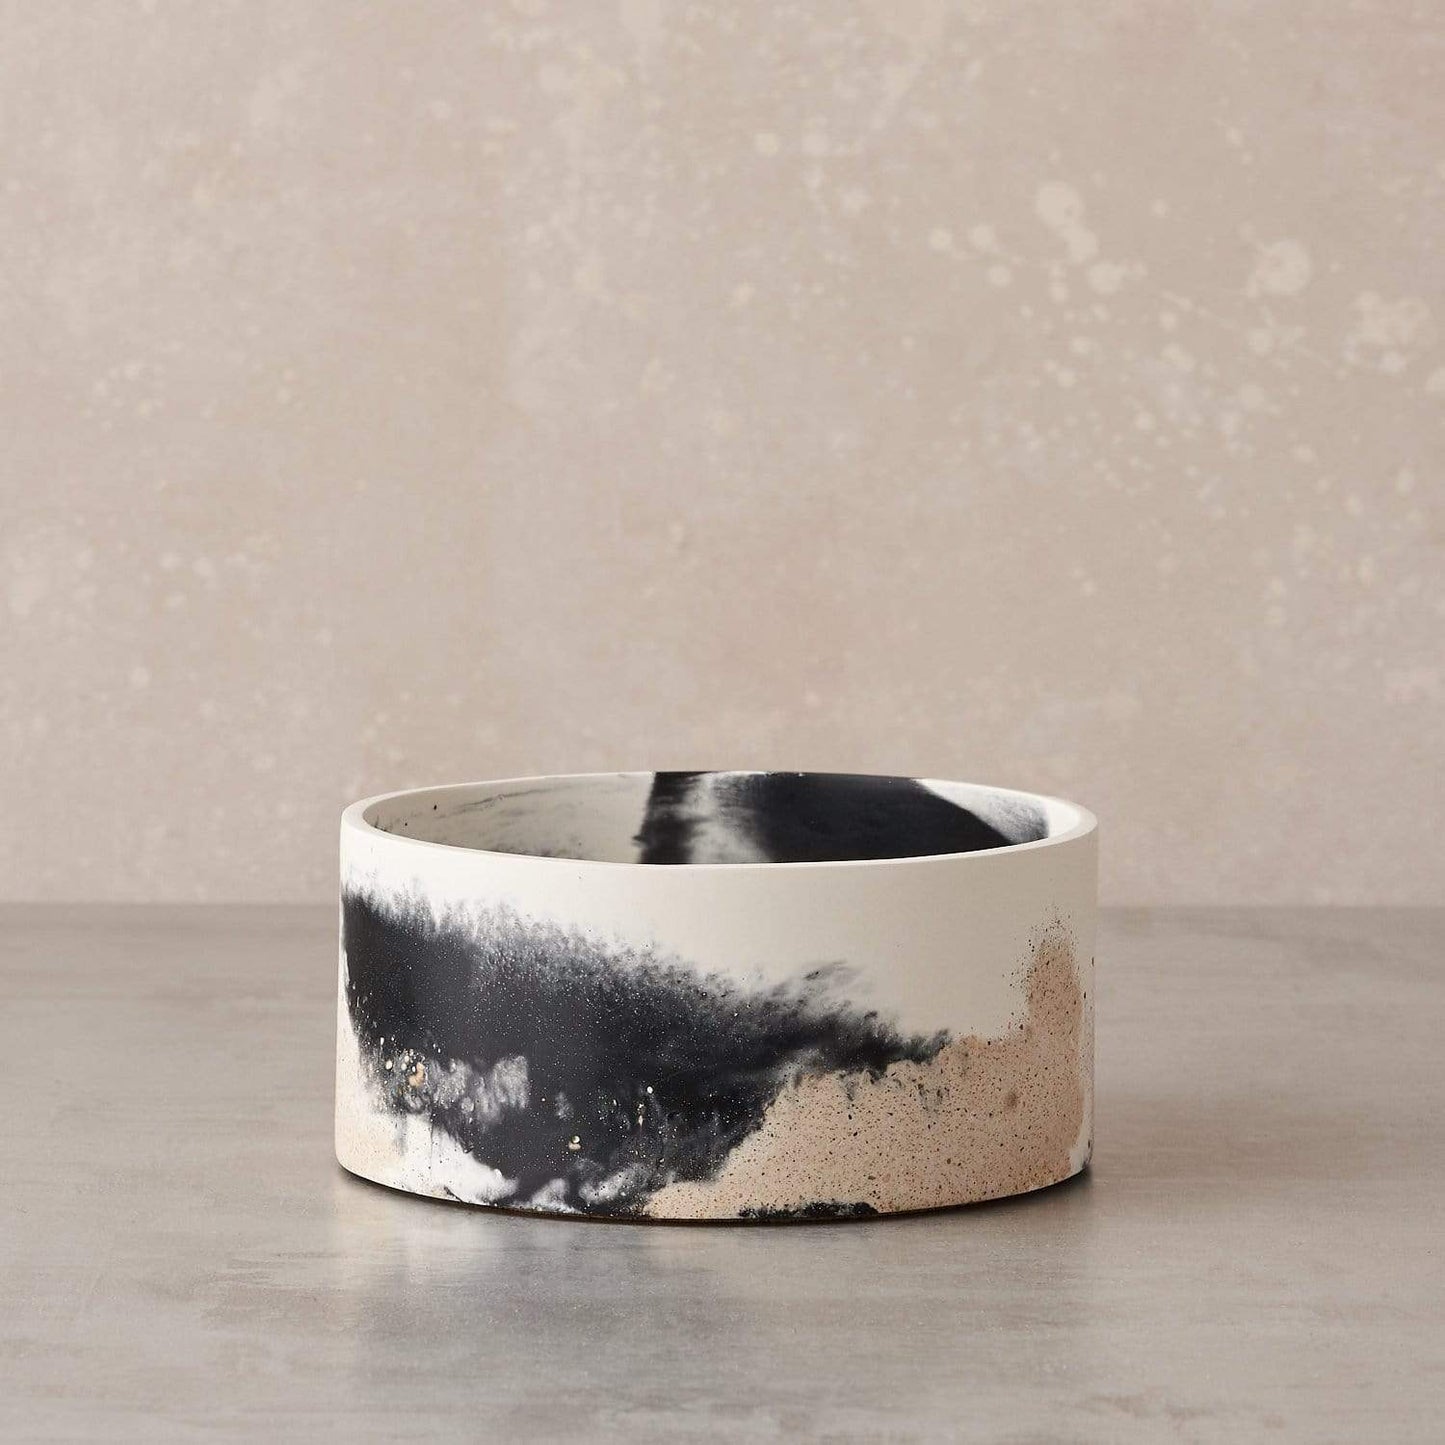 Tip Studio Vessel Black and white pigment with sand Small Cylinder Vessel (various colours)